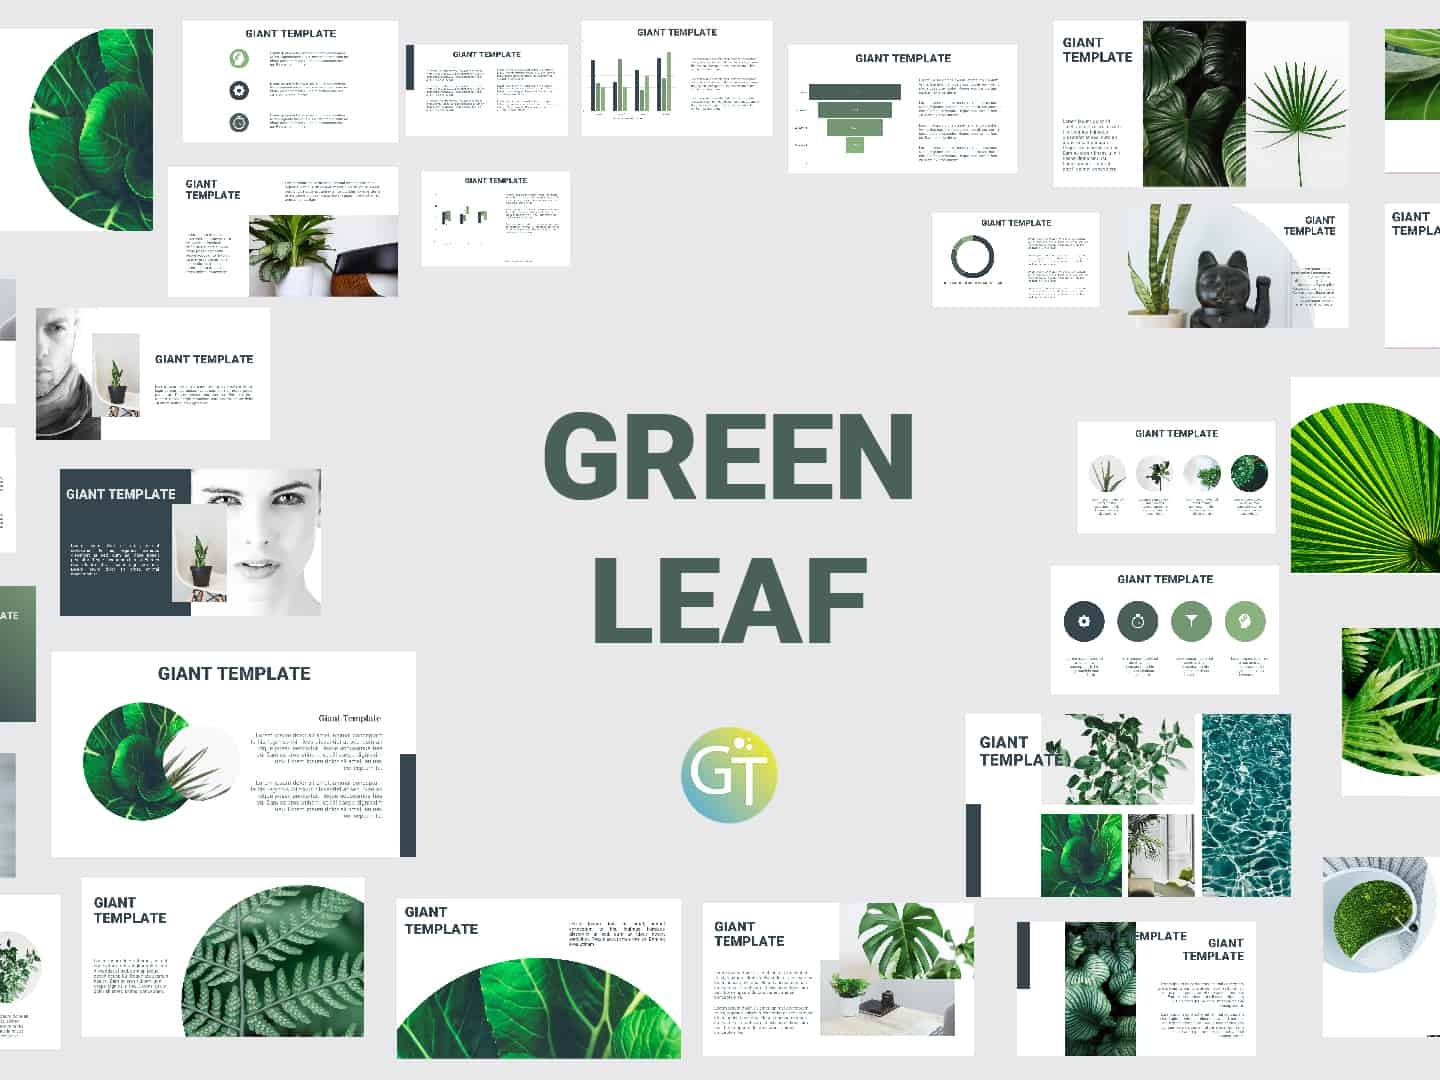 green-leaf-free-downloadable-powerpoint-templates-by-giant-template-on